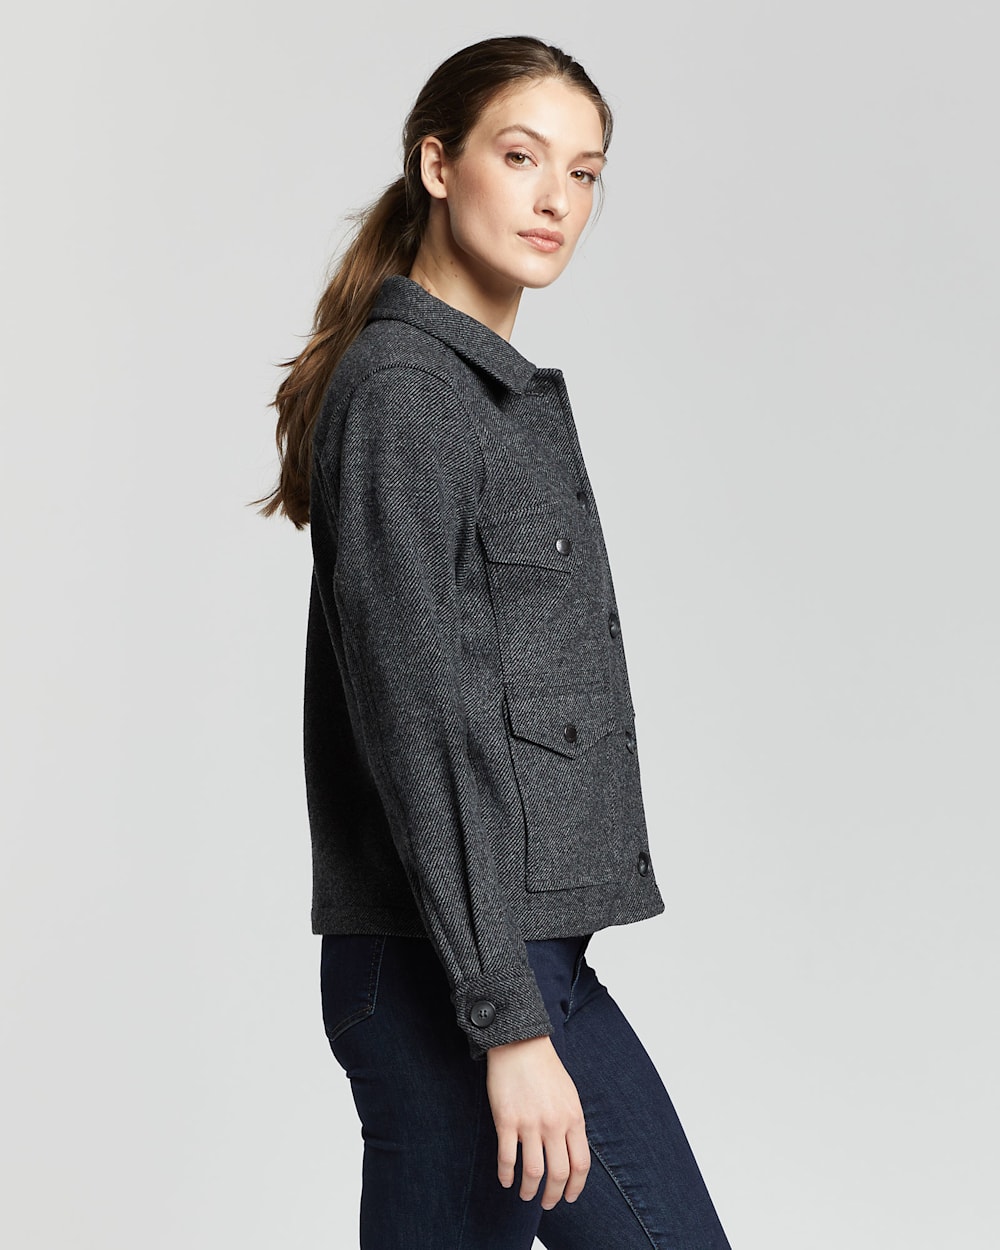 ALTERNATE VIEW OF WOMEN'S WOOL TWILL UTILITY JACKET IN GREY MIX/BLACK image number 2